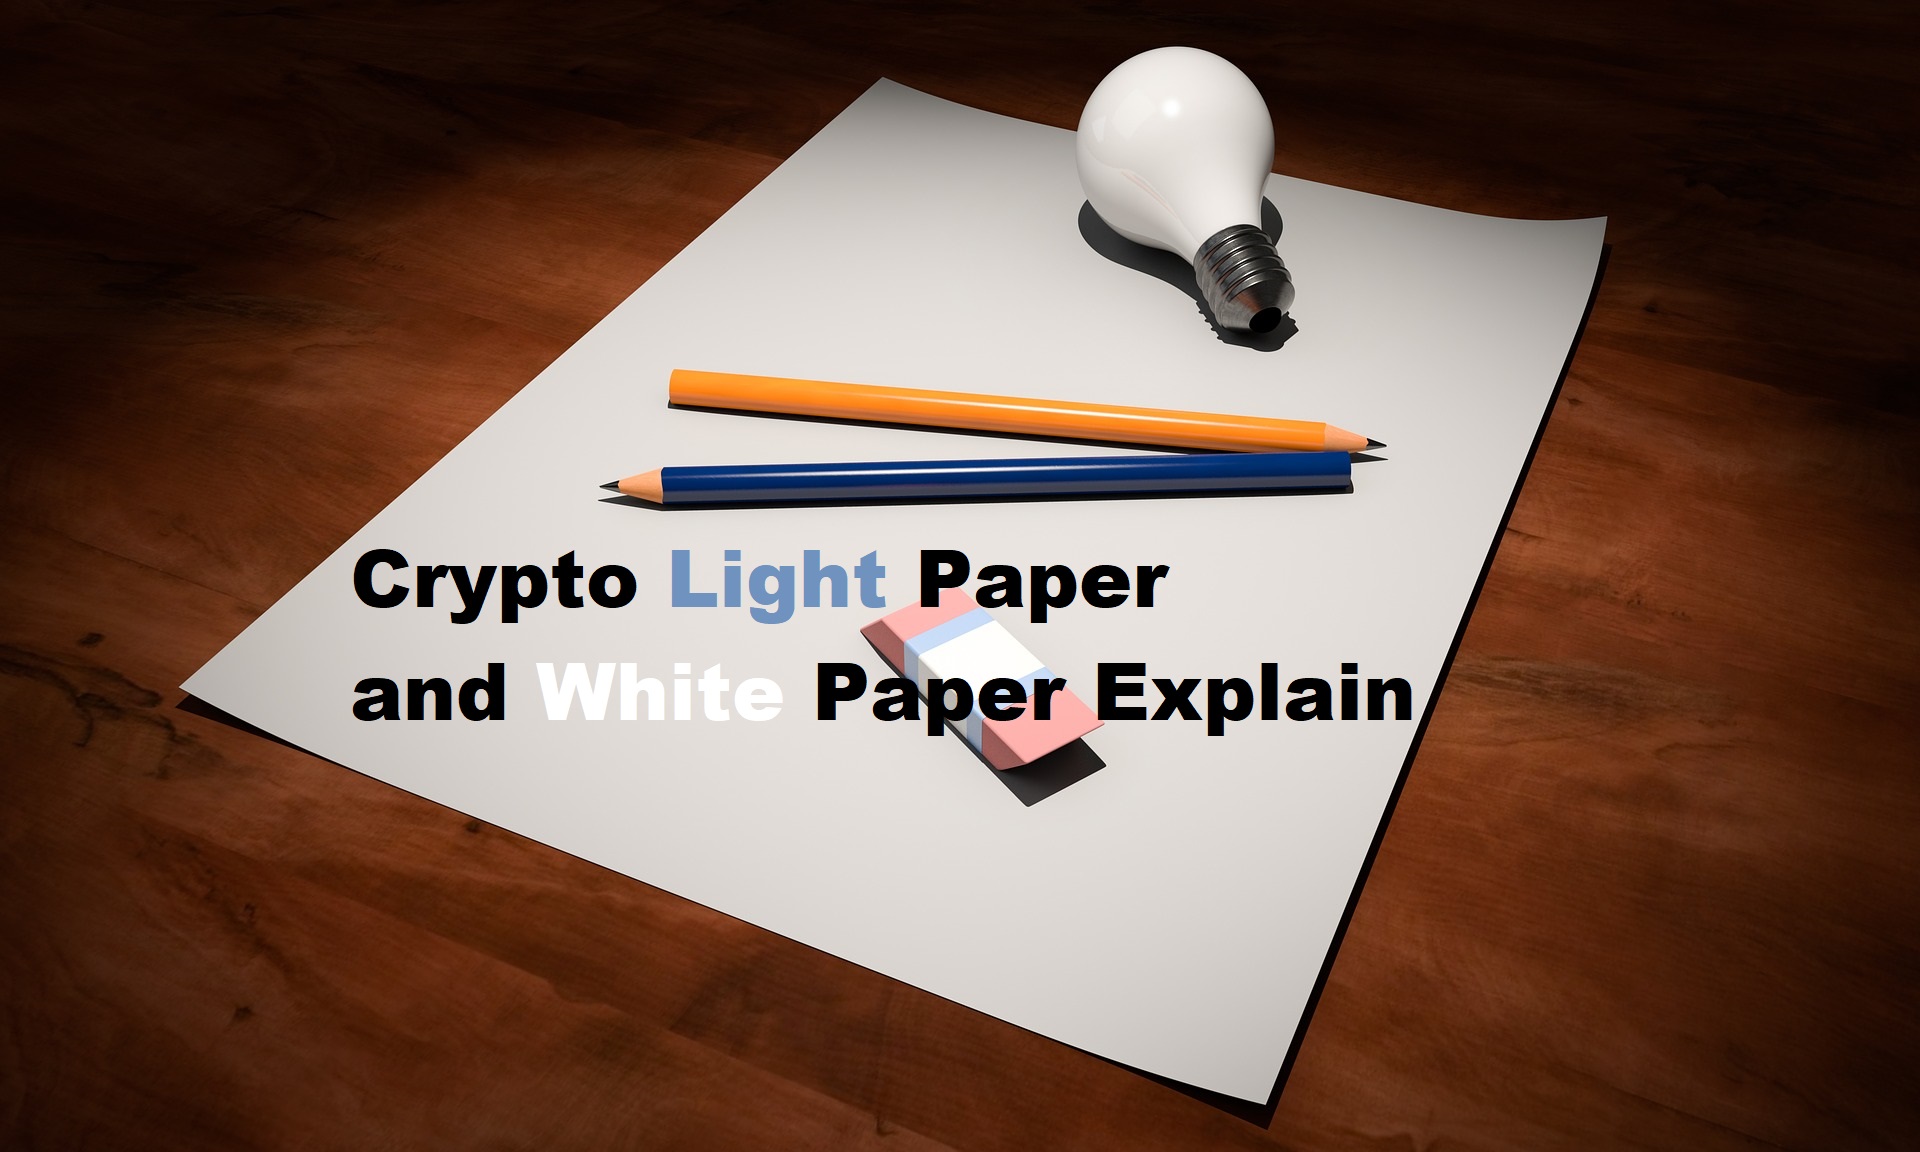 What is a light paper in crypto?